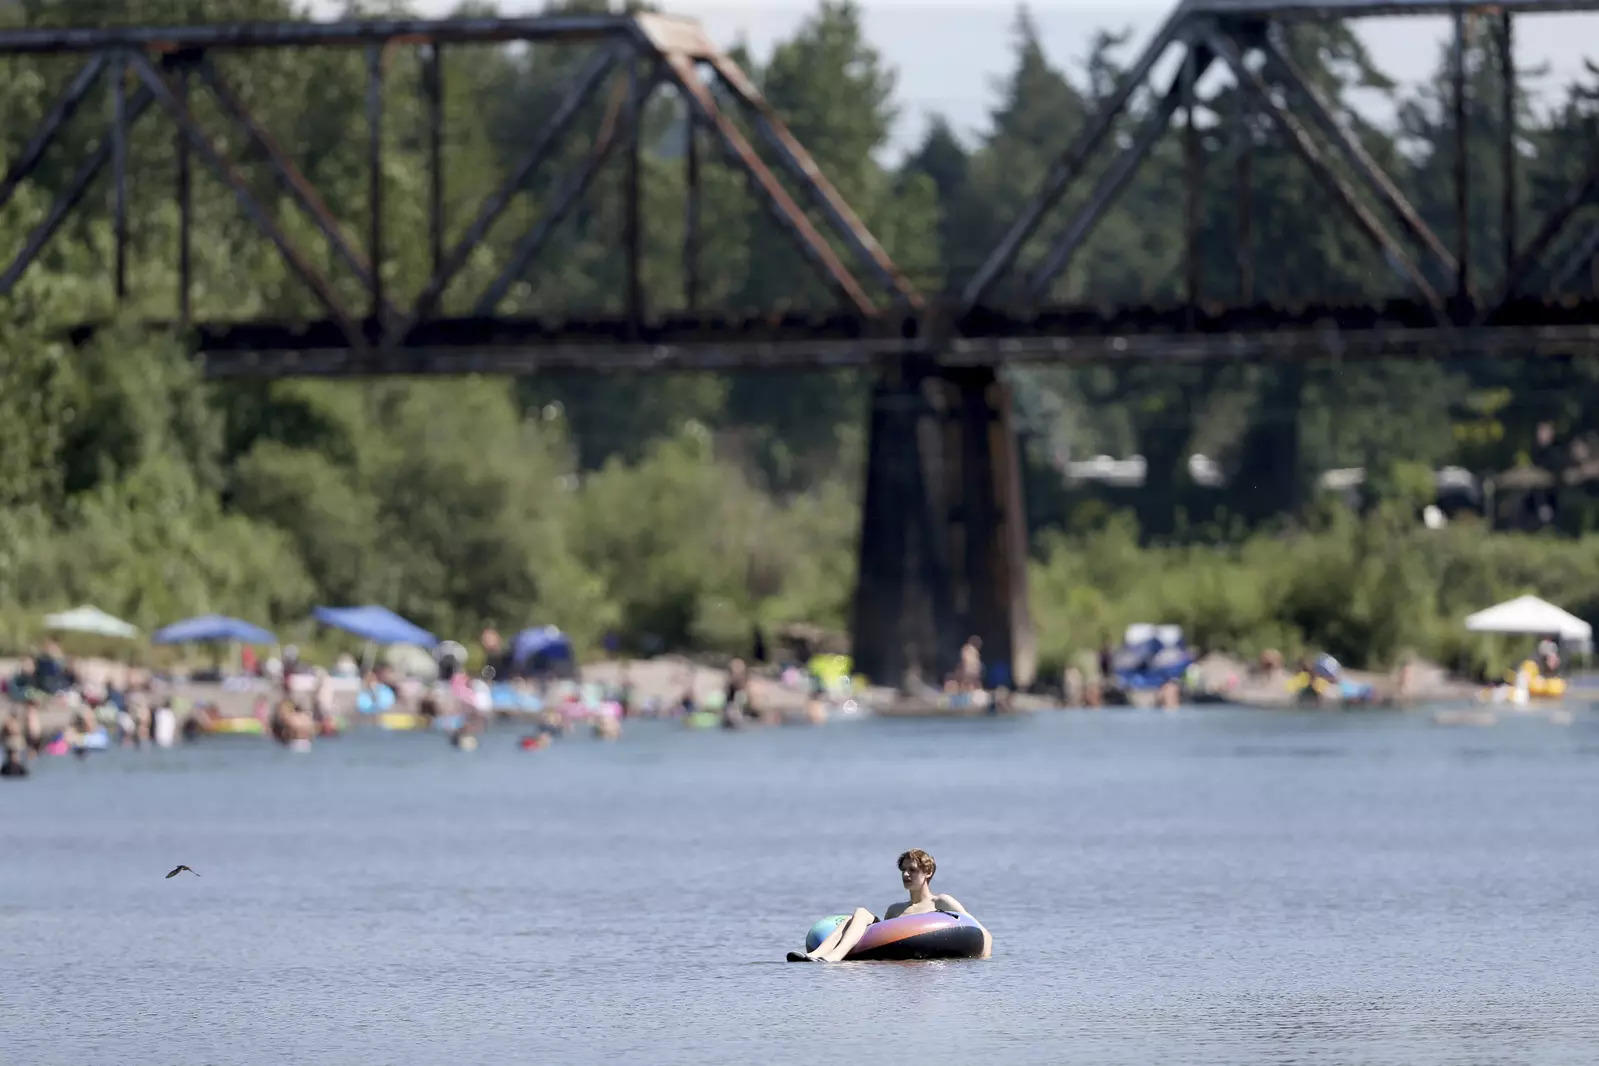 People gather at the Sandy River Delta, in Ore., to cool off during the start of what should be a record-setting heat wave. (AP)